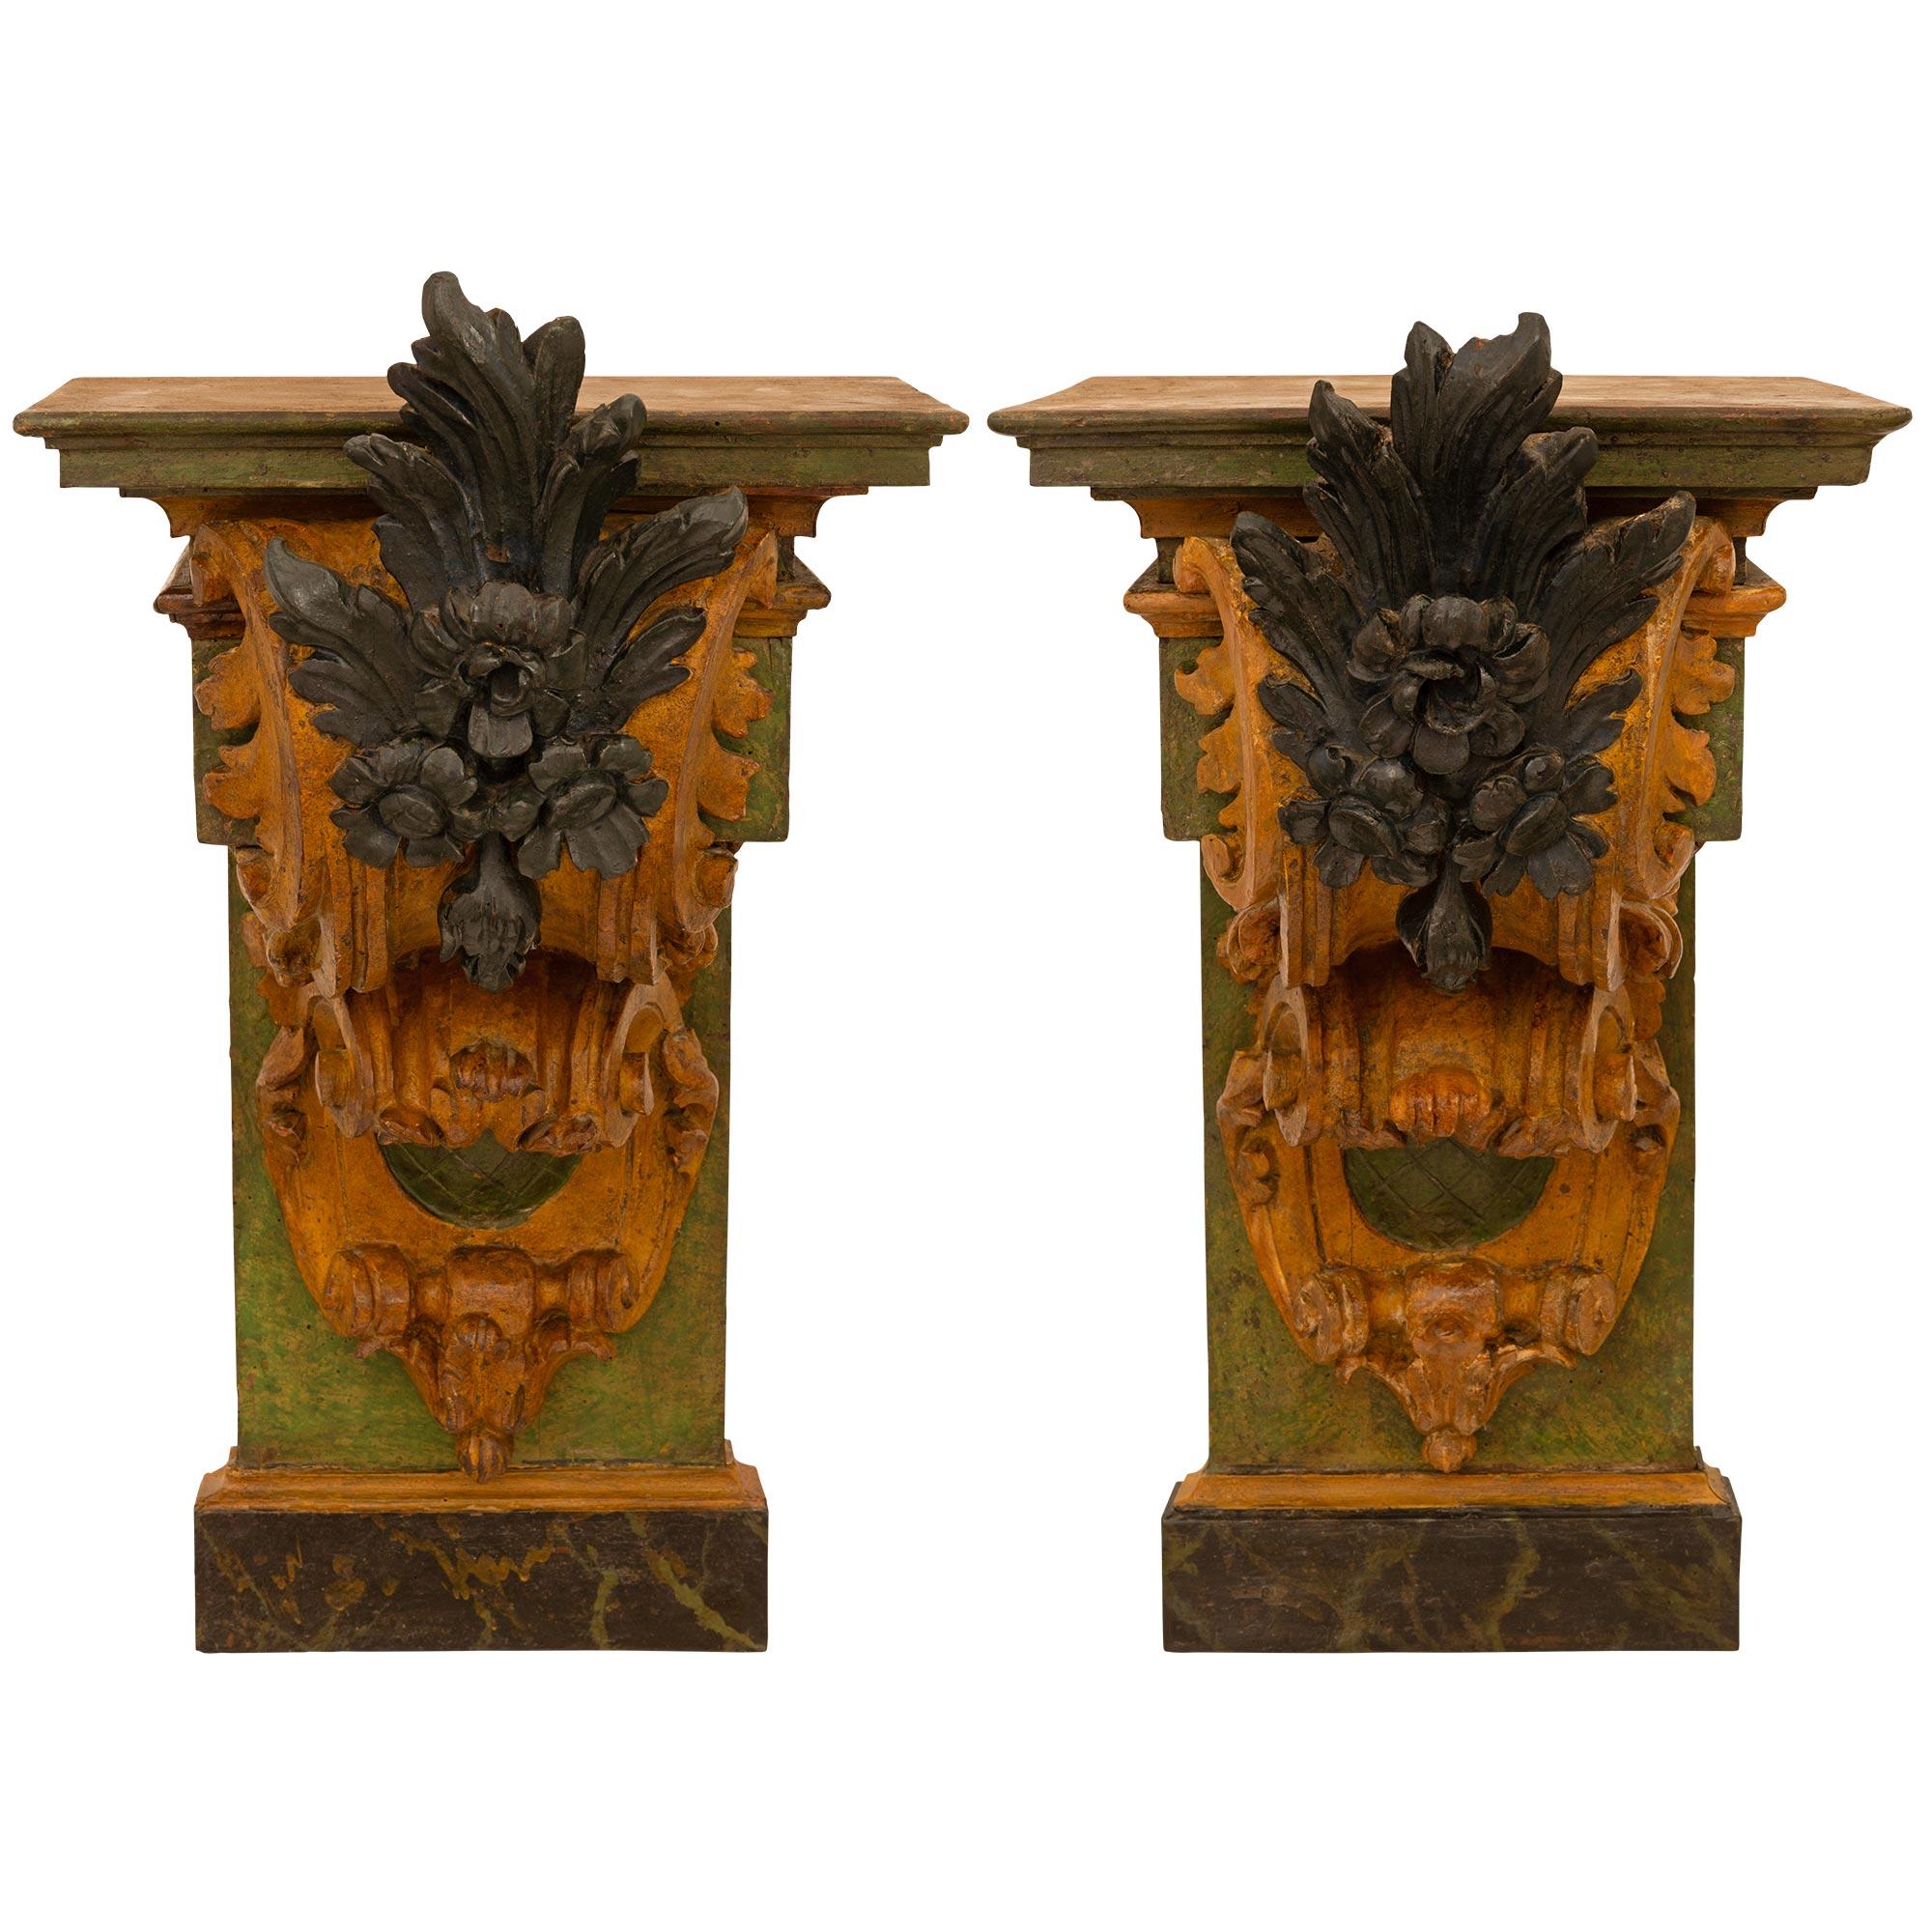 Pair Of Italian 18th Century Baroque St. Patinated Wood &Giltwood Wall Brackets For Sale 5